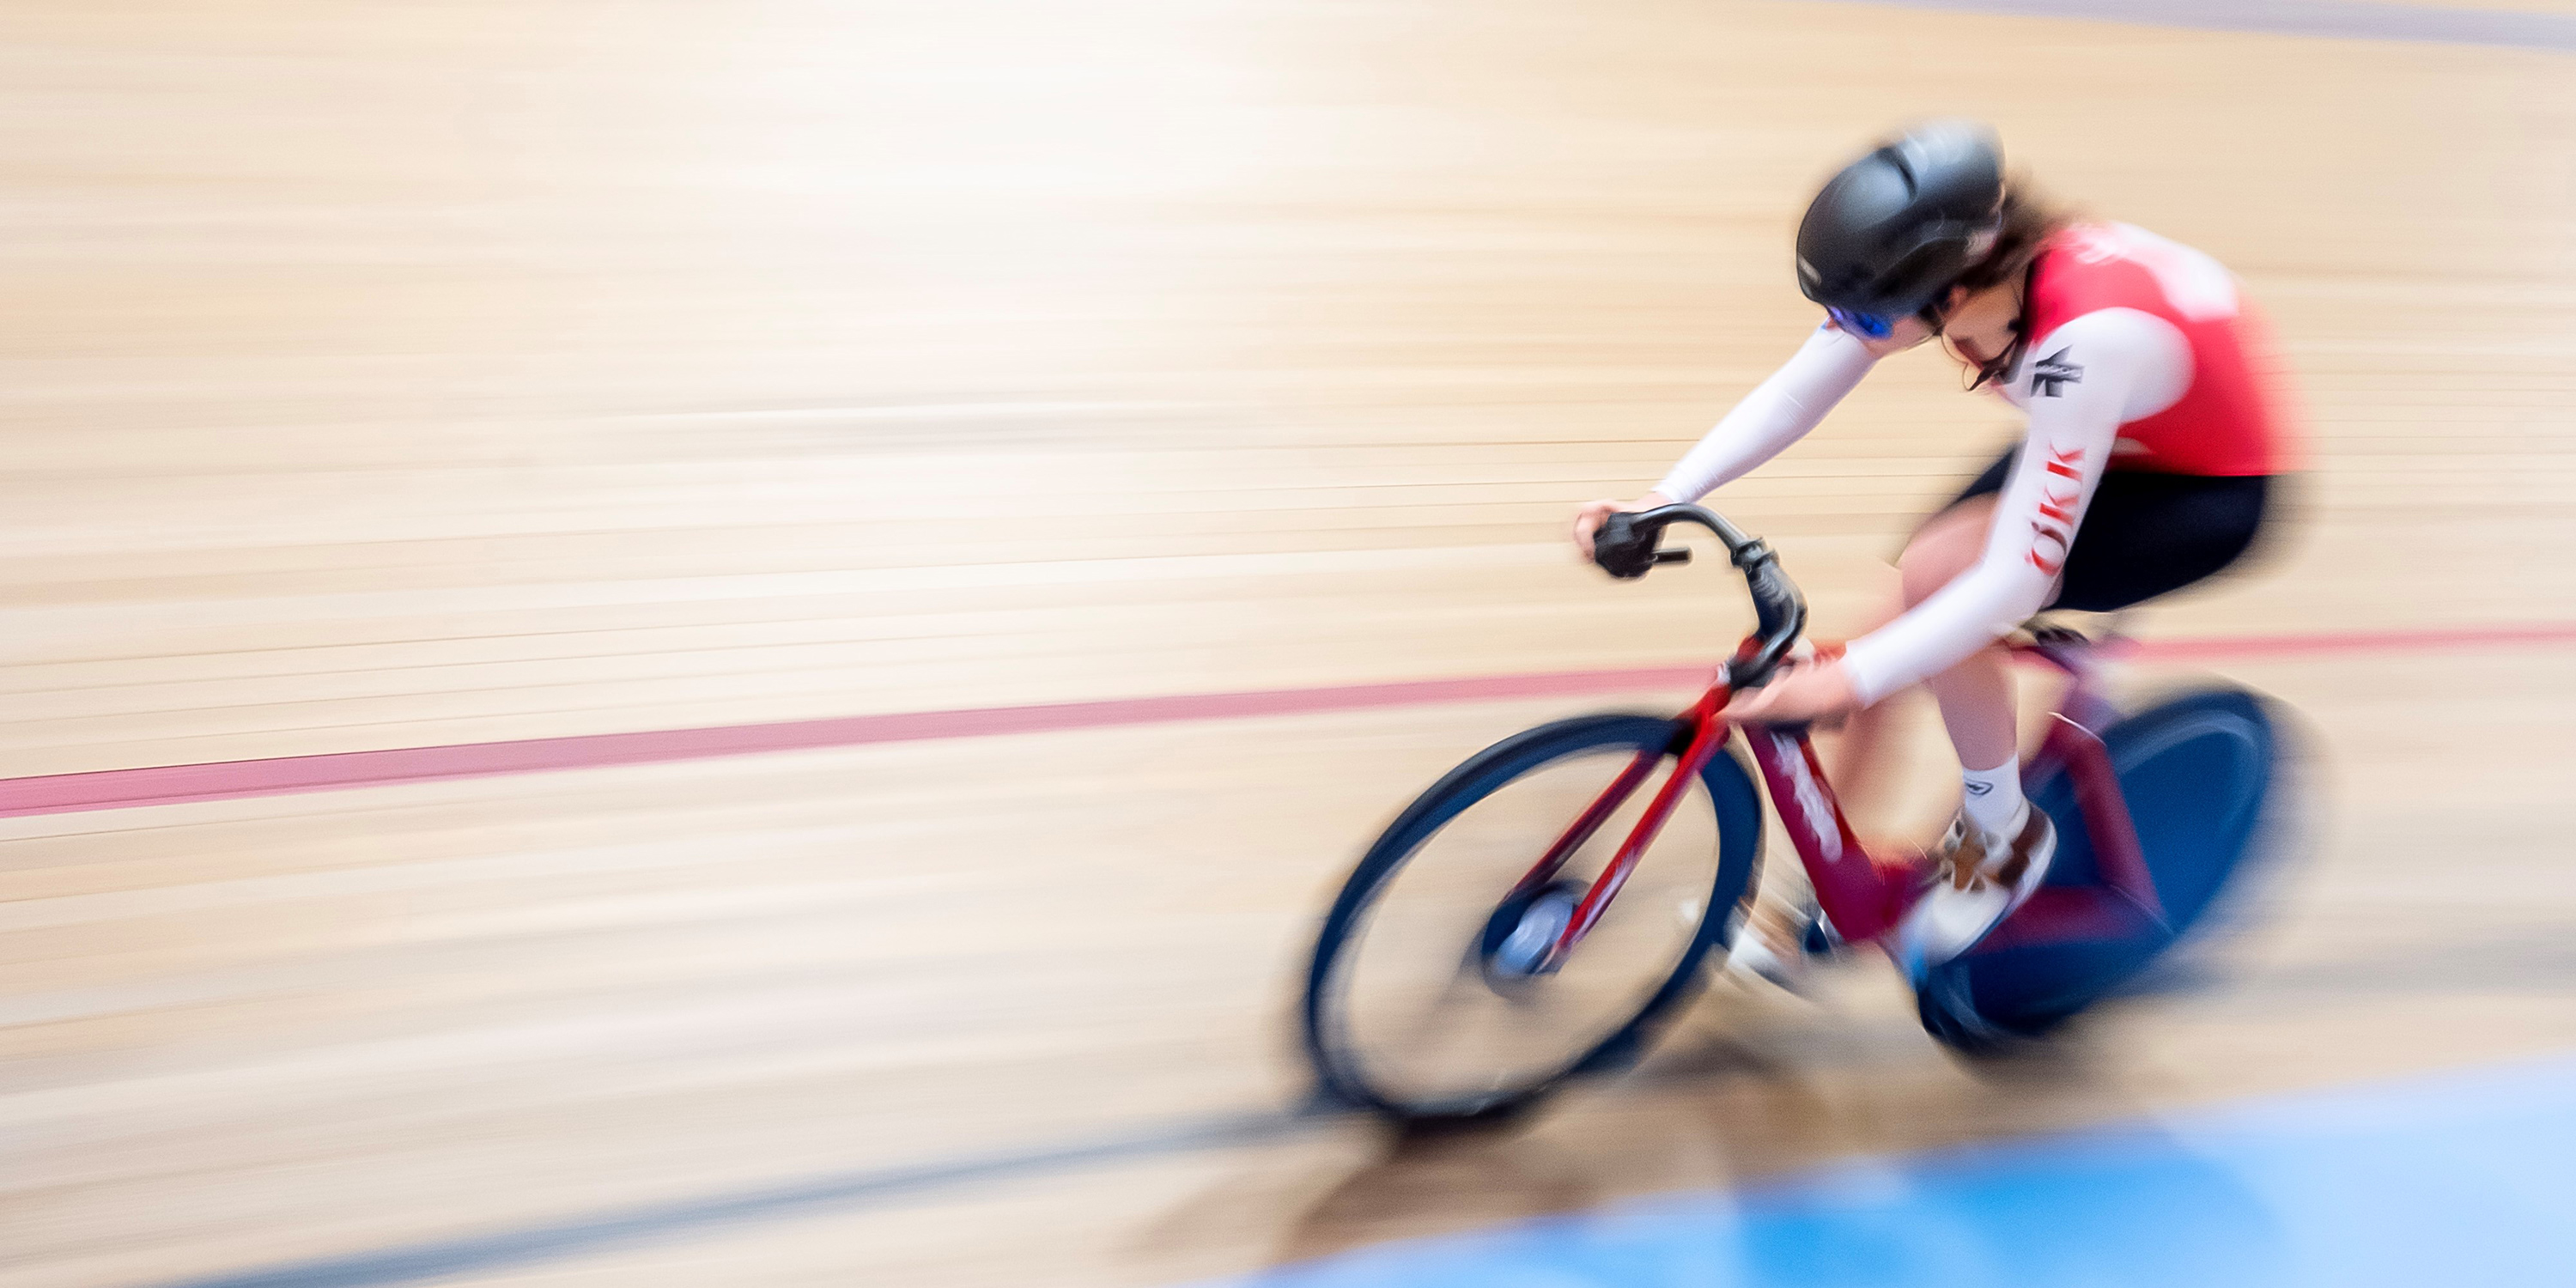 A woman on a racing bike on an indoor race track.